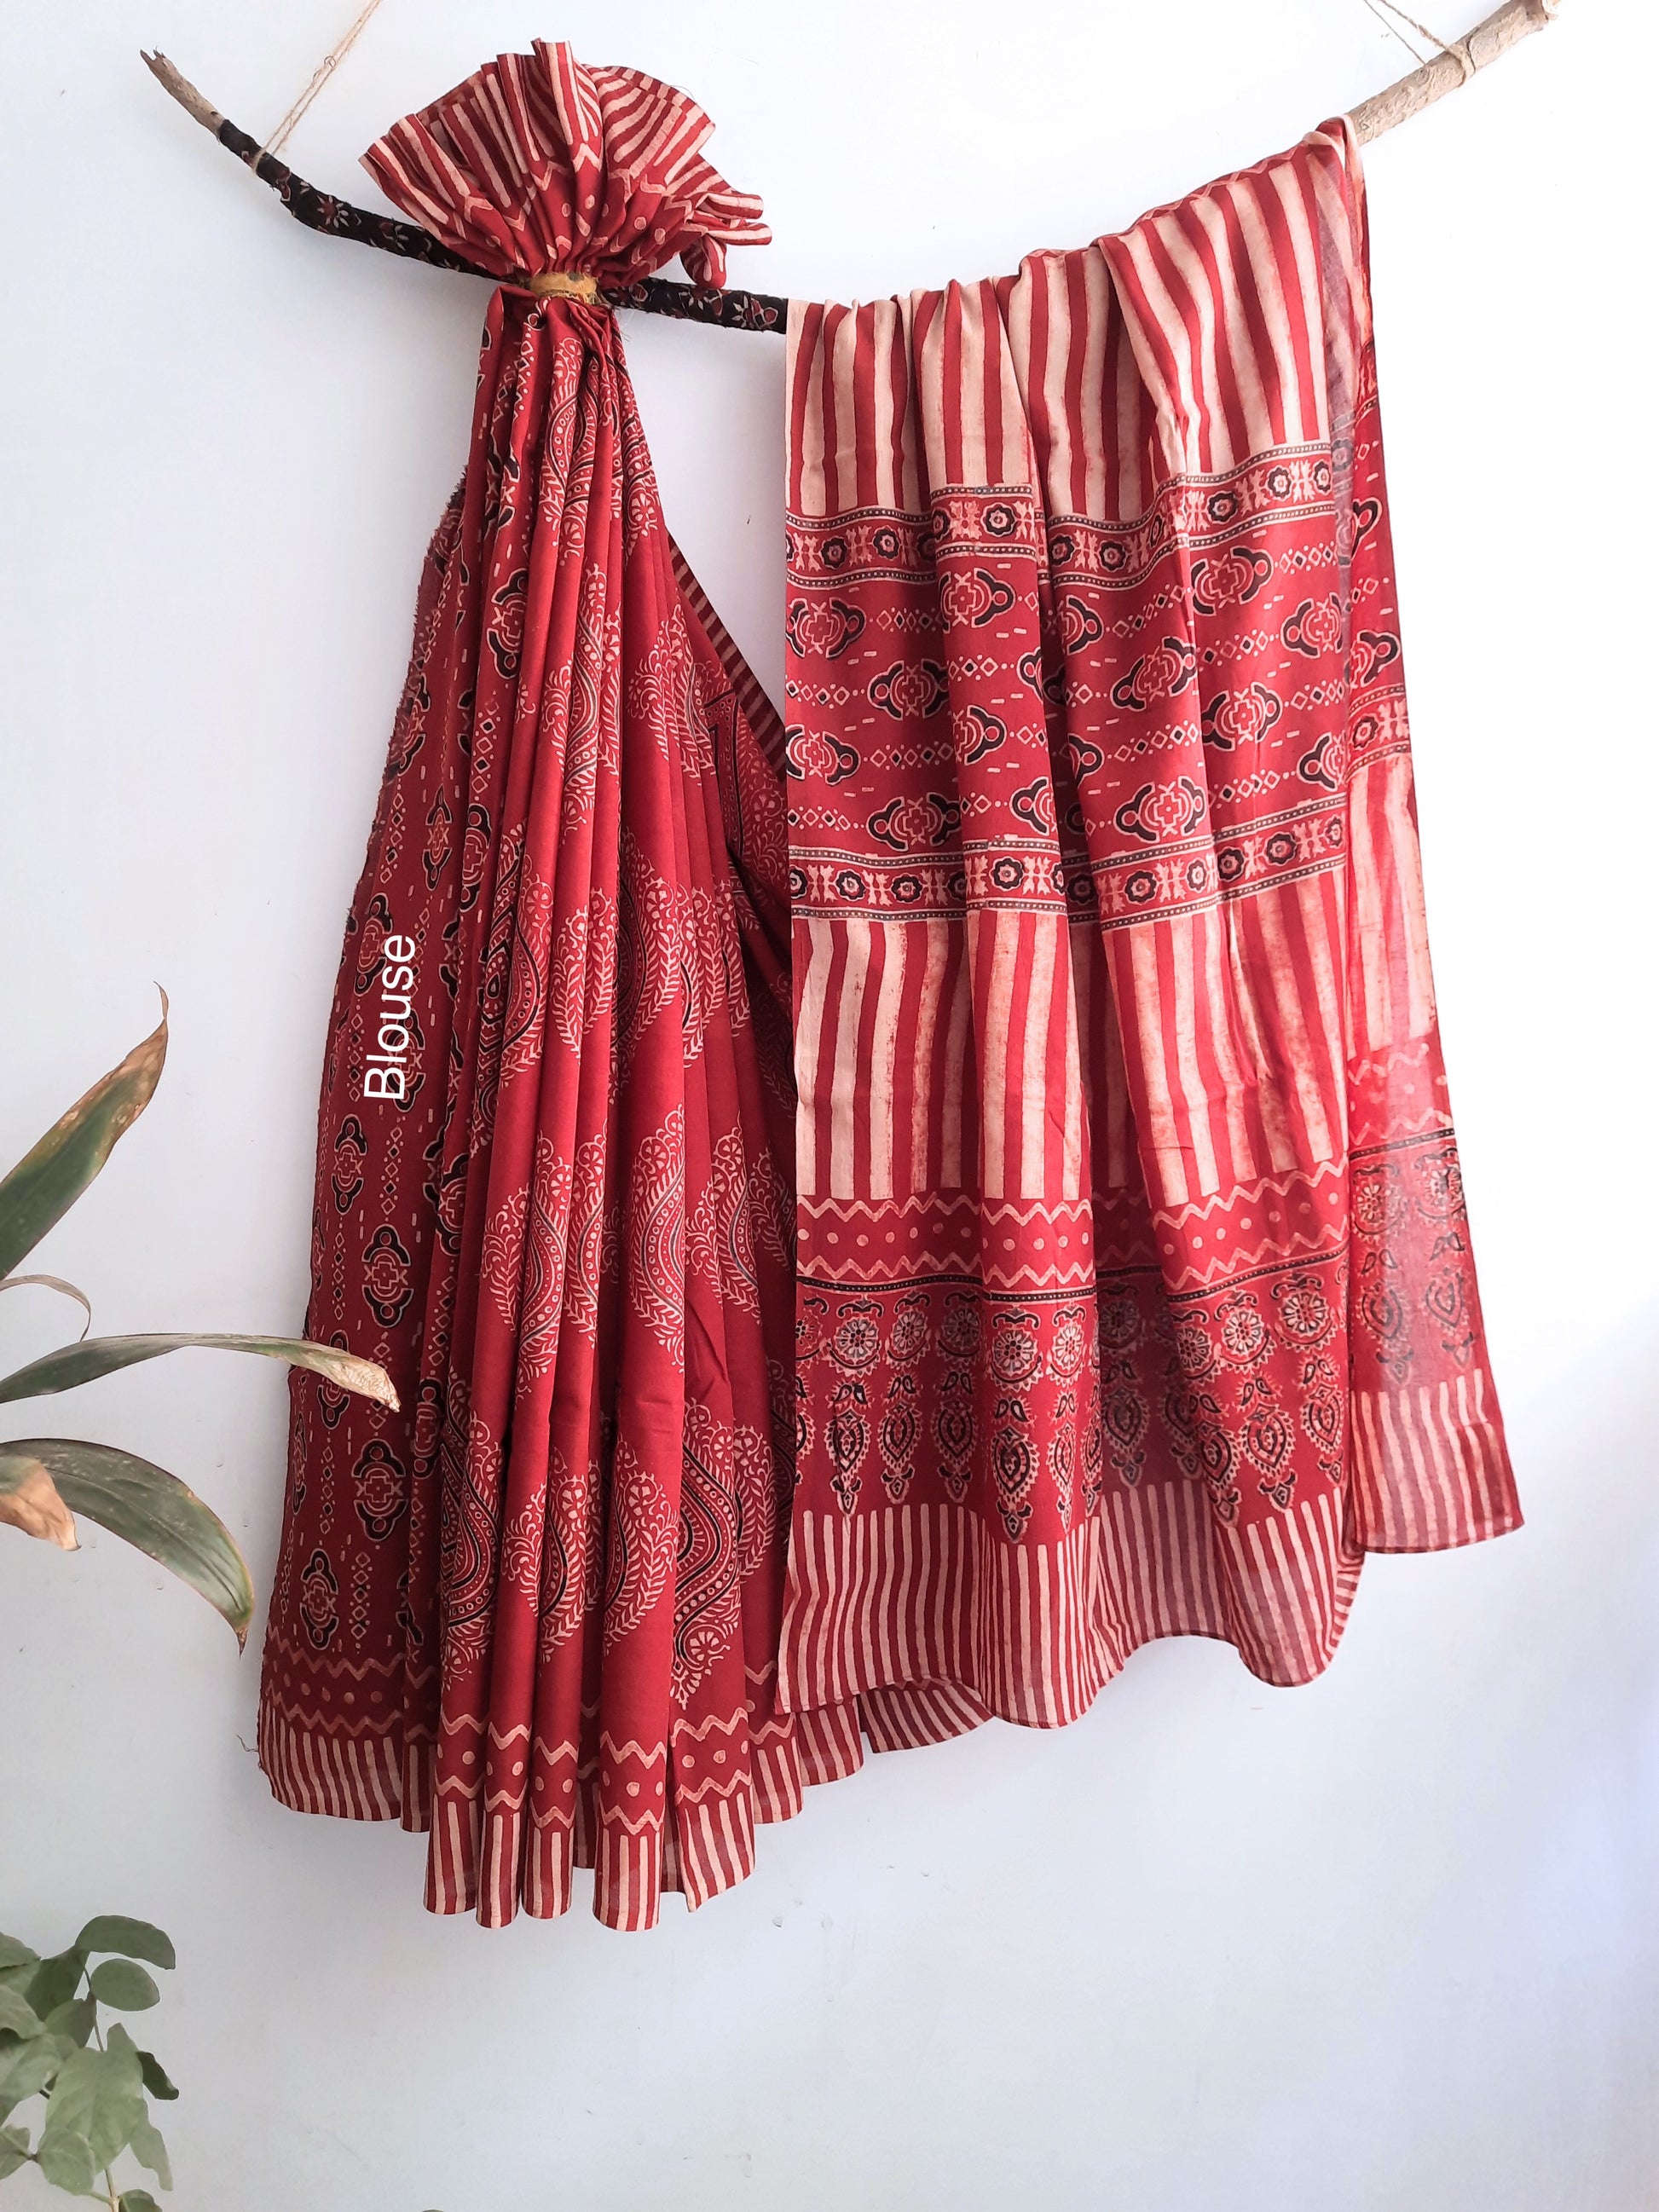 Madder-Dyed Ajrakh Hand Block Printed Cotton Saree: Exquisite fusion designs, 100% cotton for style and comfort. A passionately crafted essential for your fashion collection.